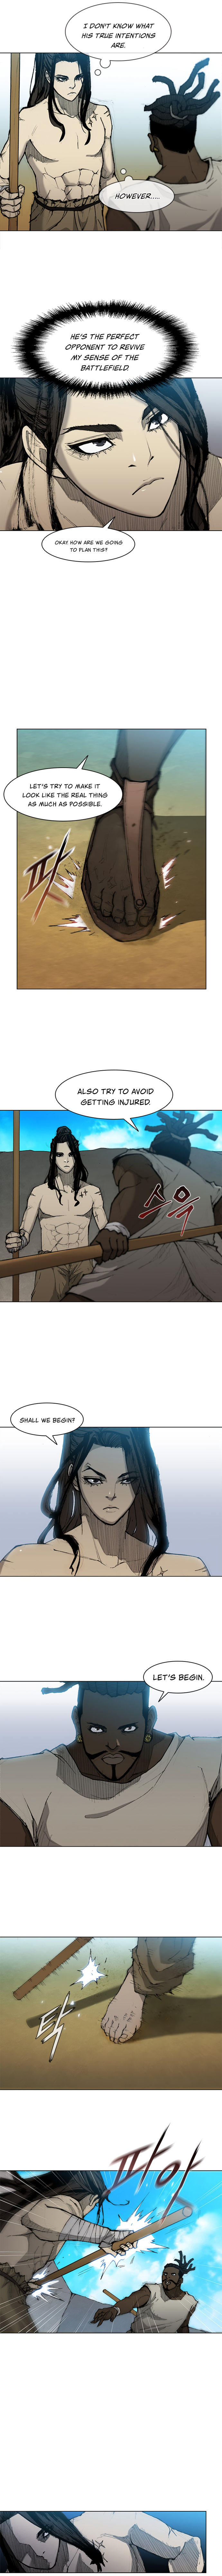 Long Way of the Warrior - Chapter 31 Page 3